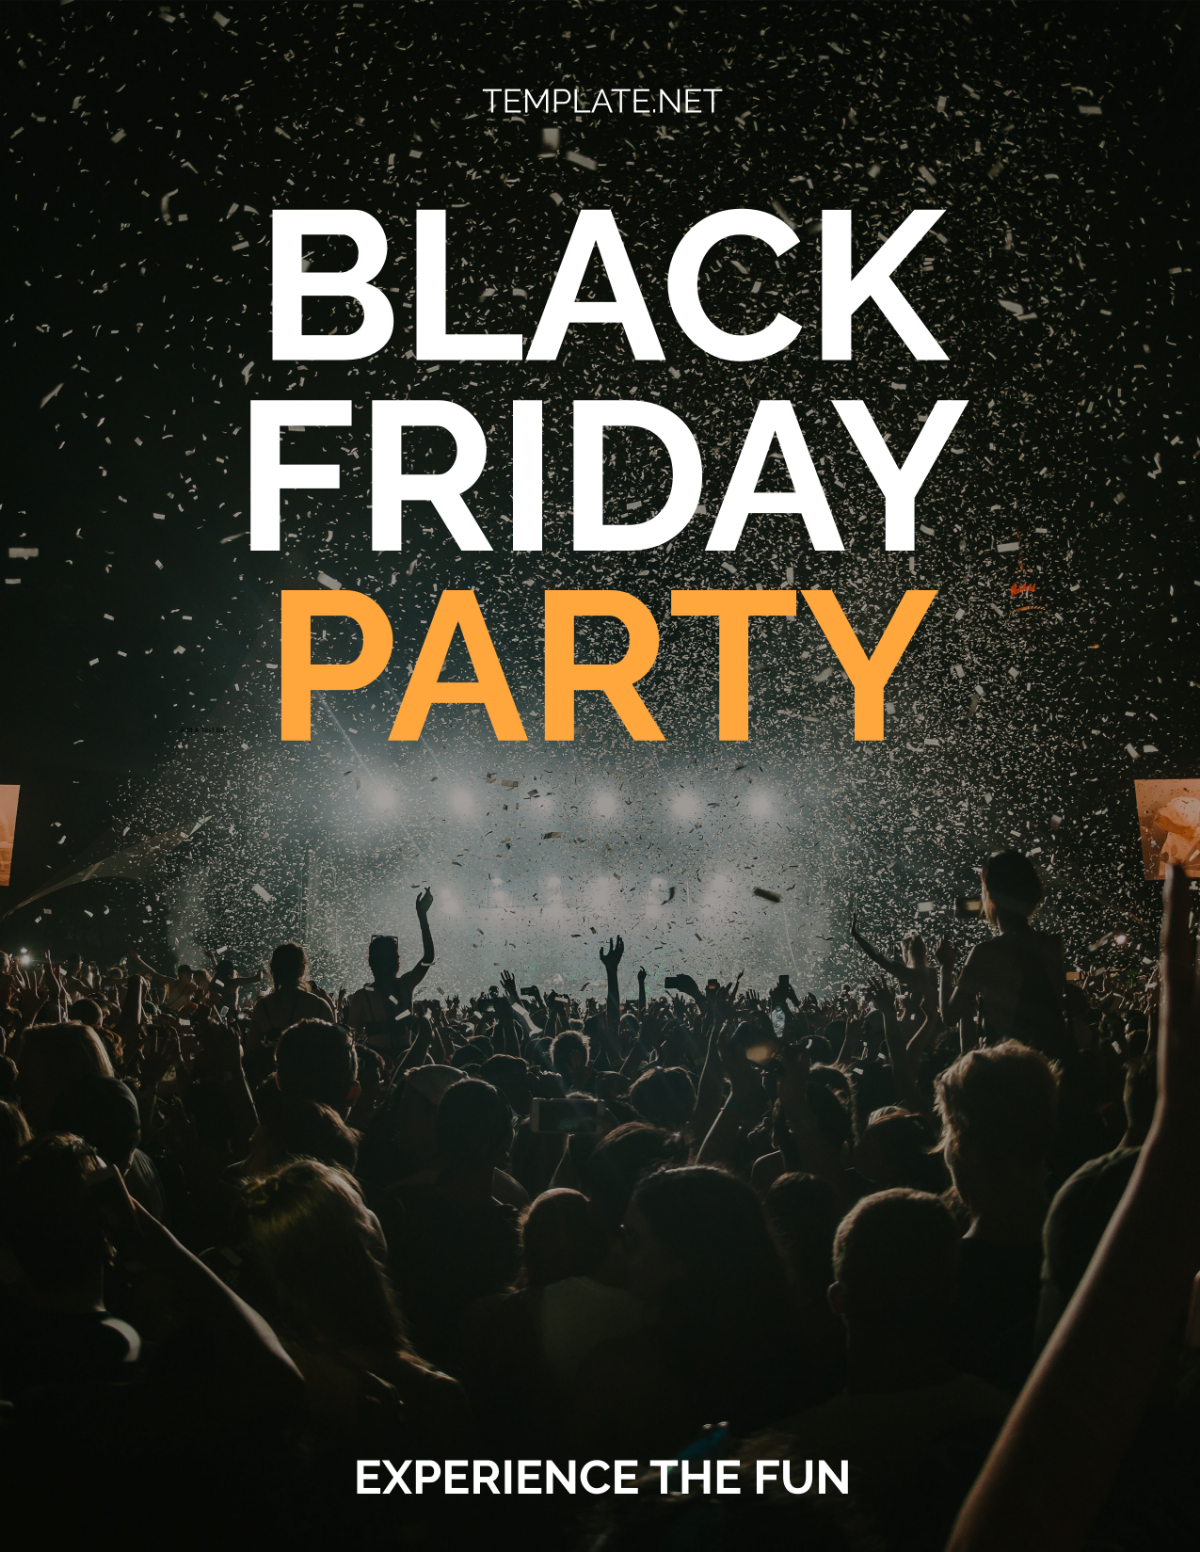 Black Friday Party Flyer Template